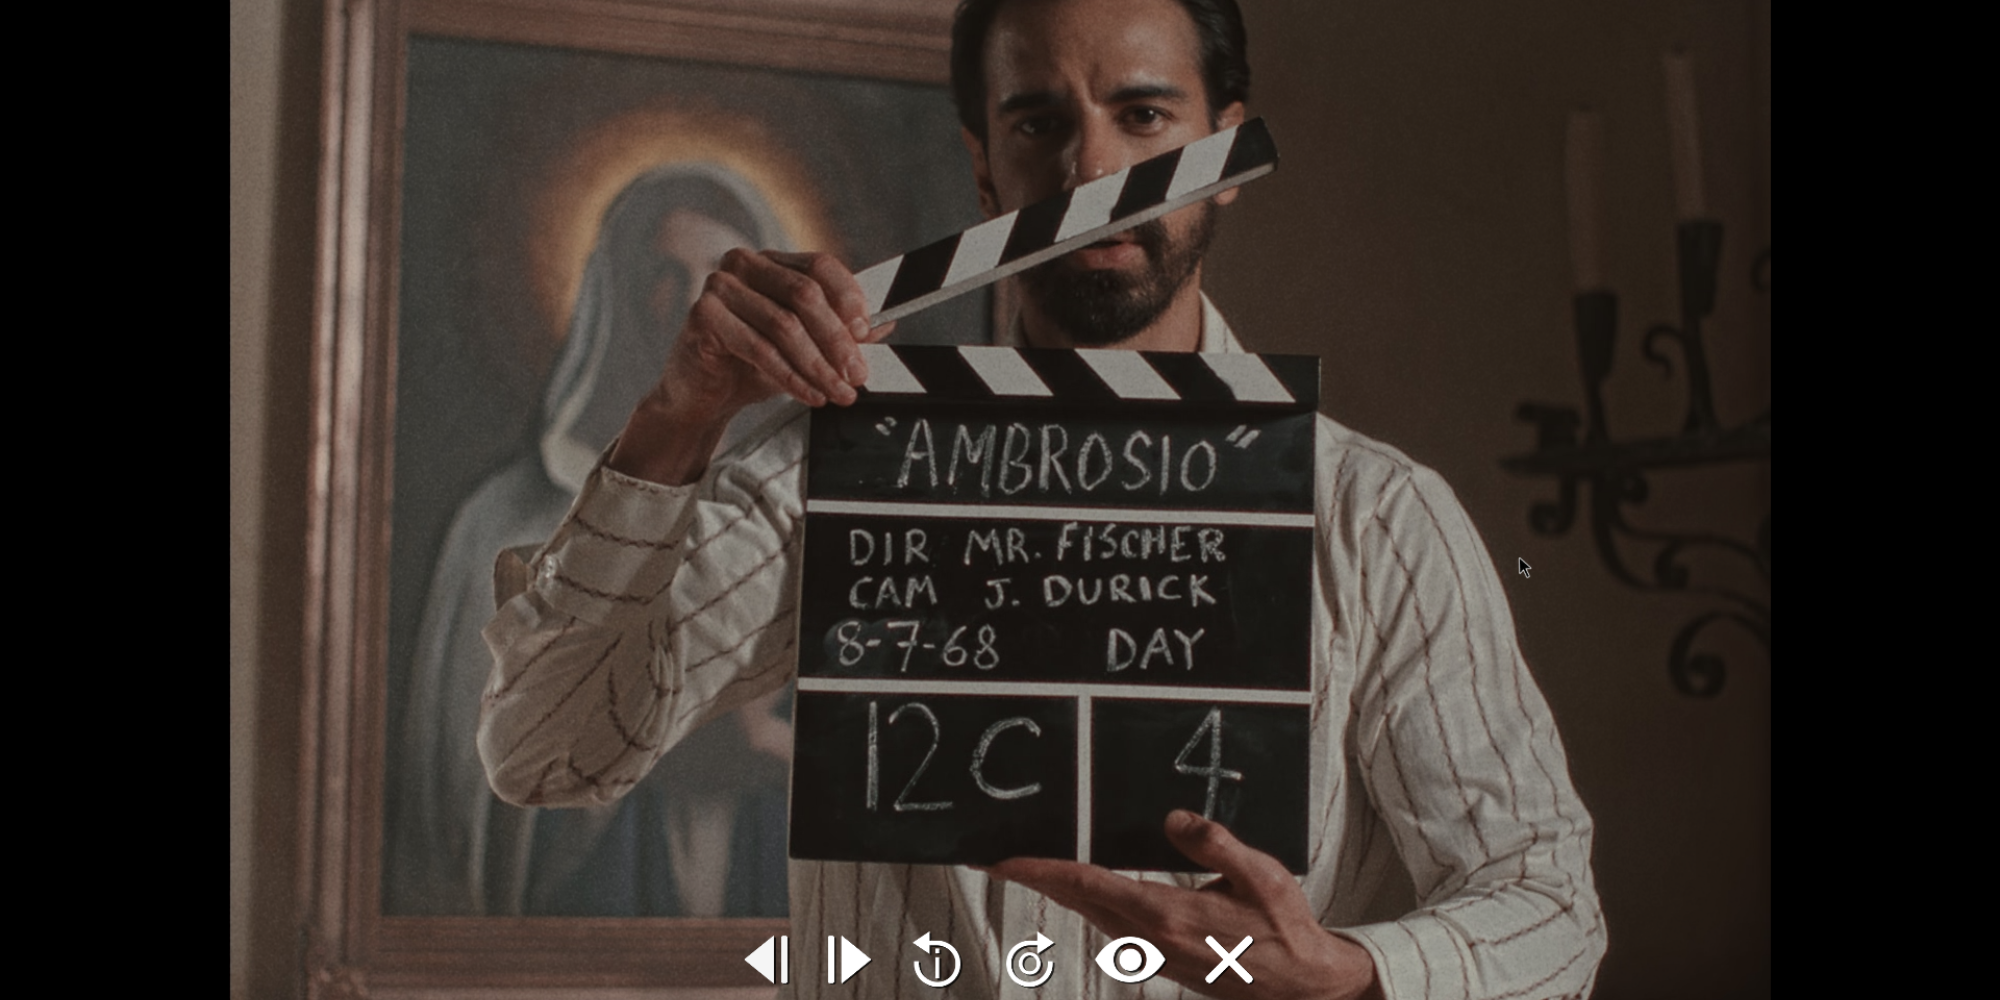 The clapperboard in Immortality